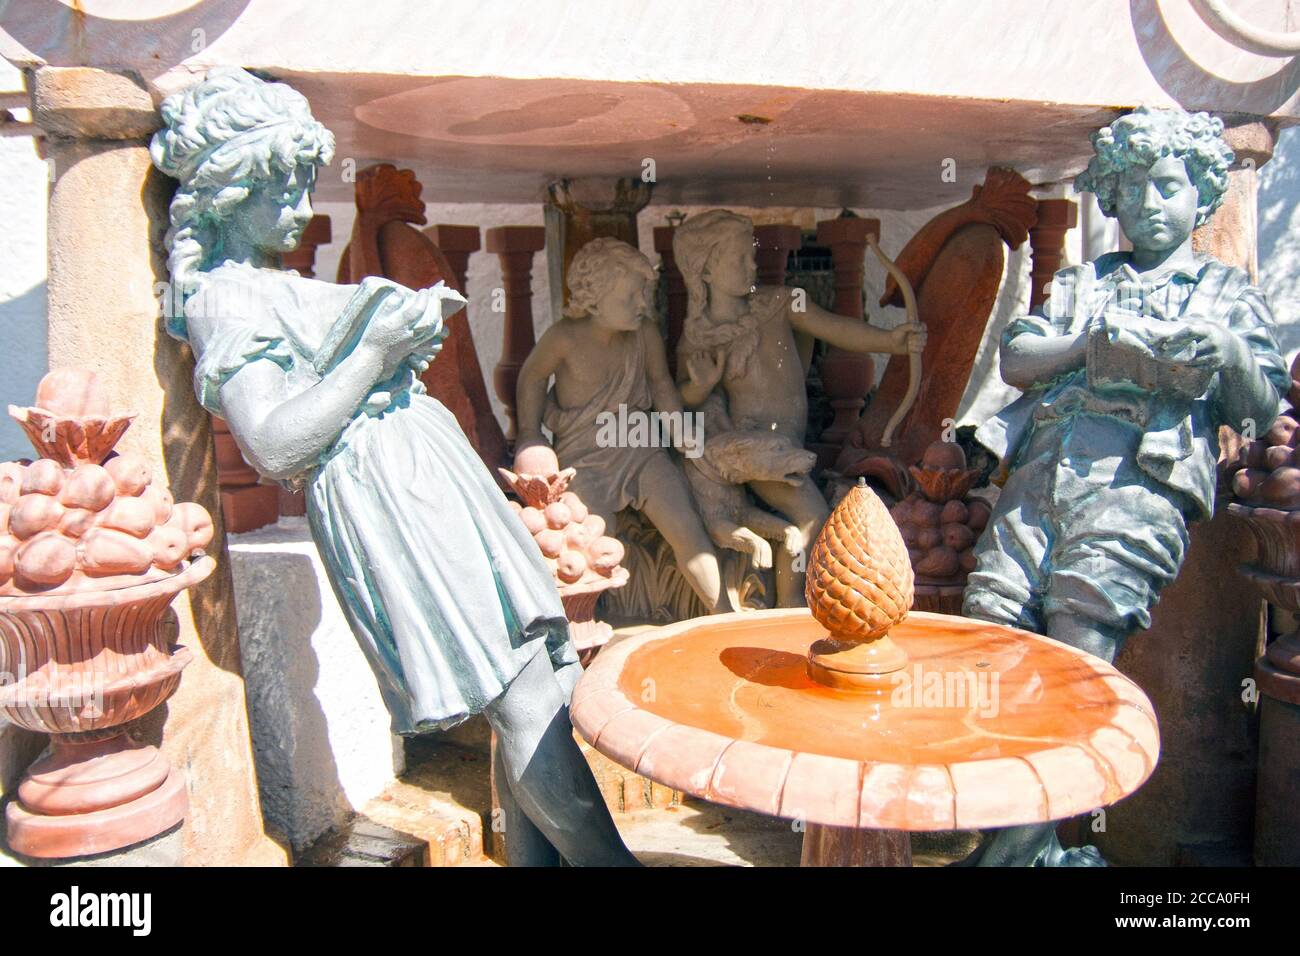 Port Lligat Spain Salvador Dali House  Fountain of the youth. Children read a book, write with a pen, hunt with a bow, like the artist in his youth. Stock Photo